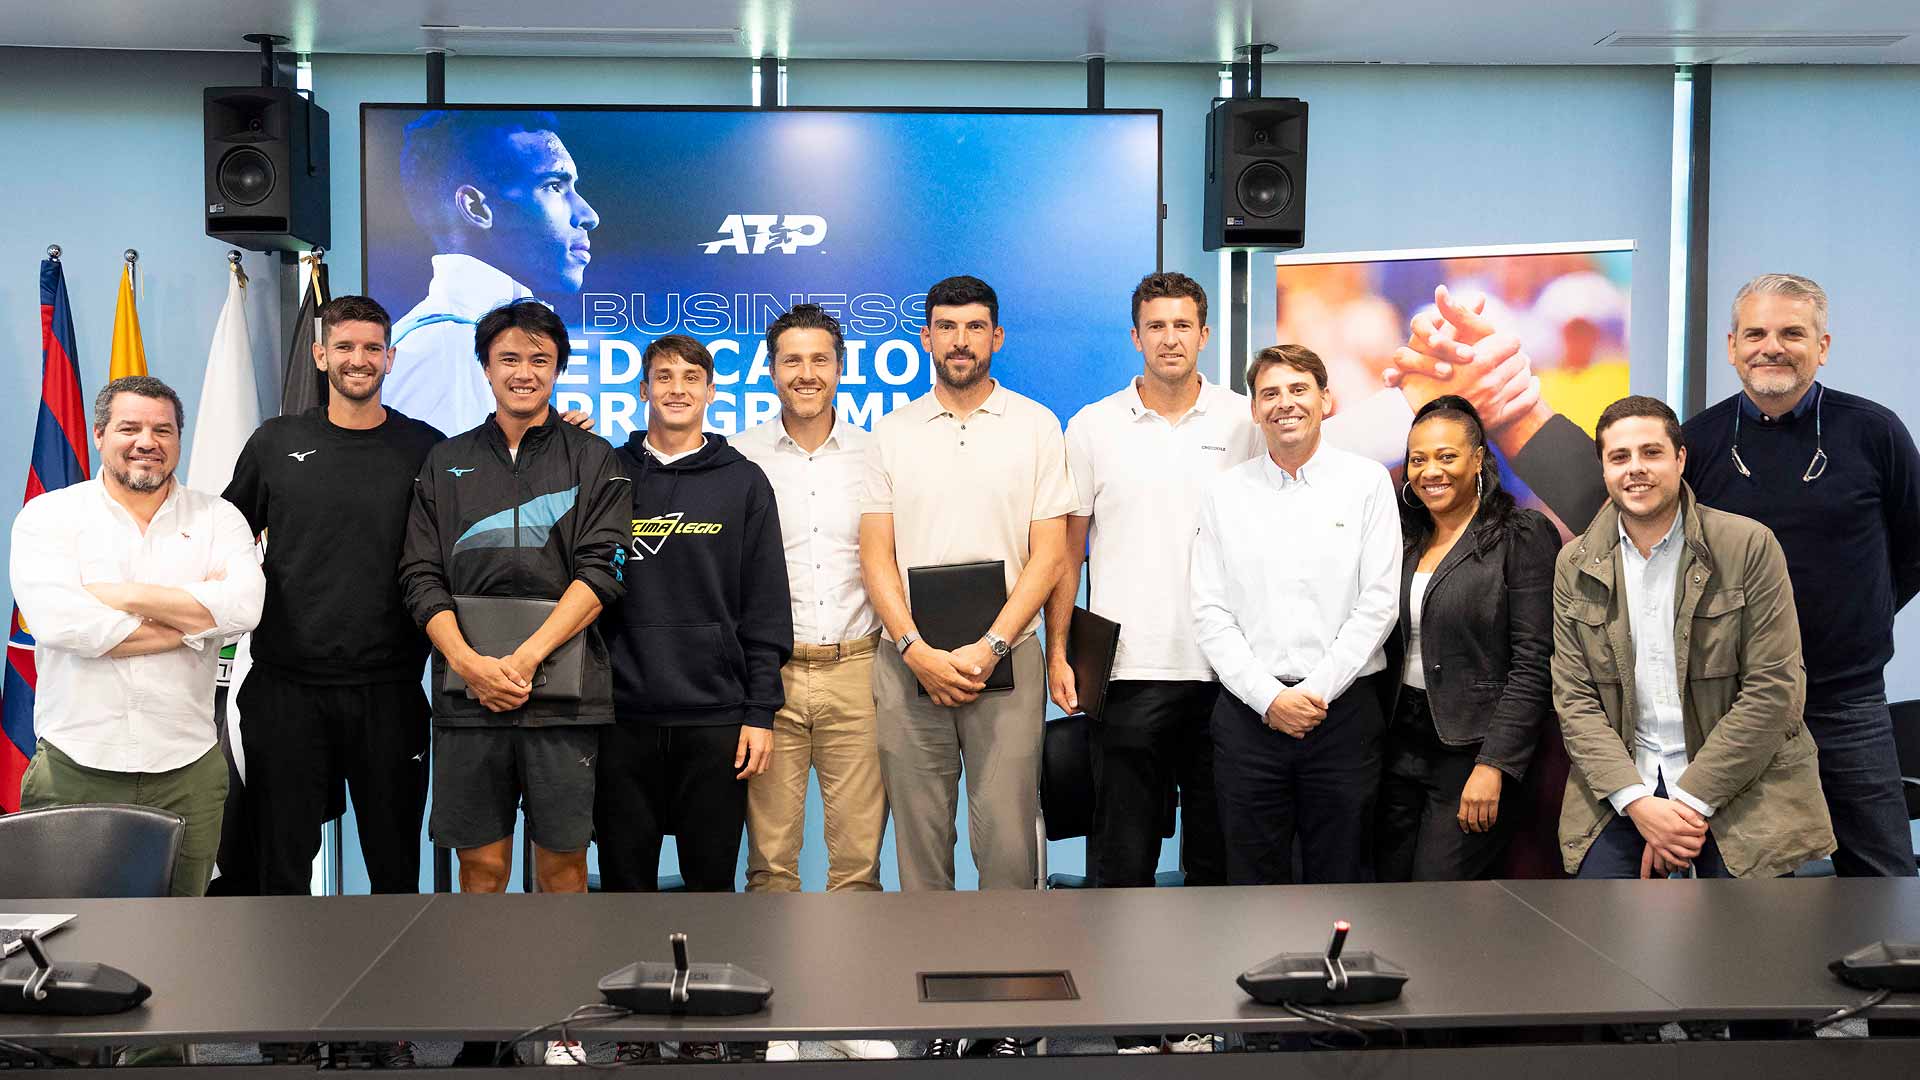 Stars complete ATP Business Education Programme in Madrid